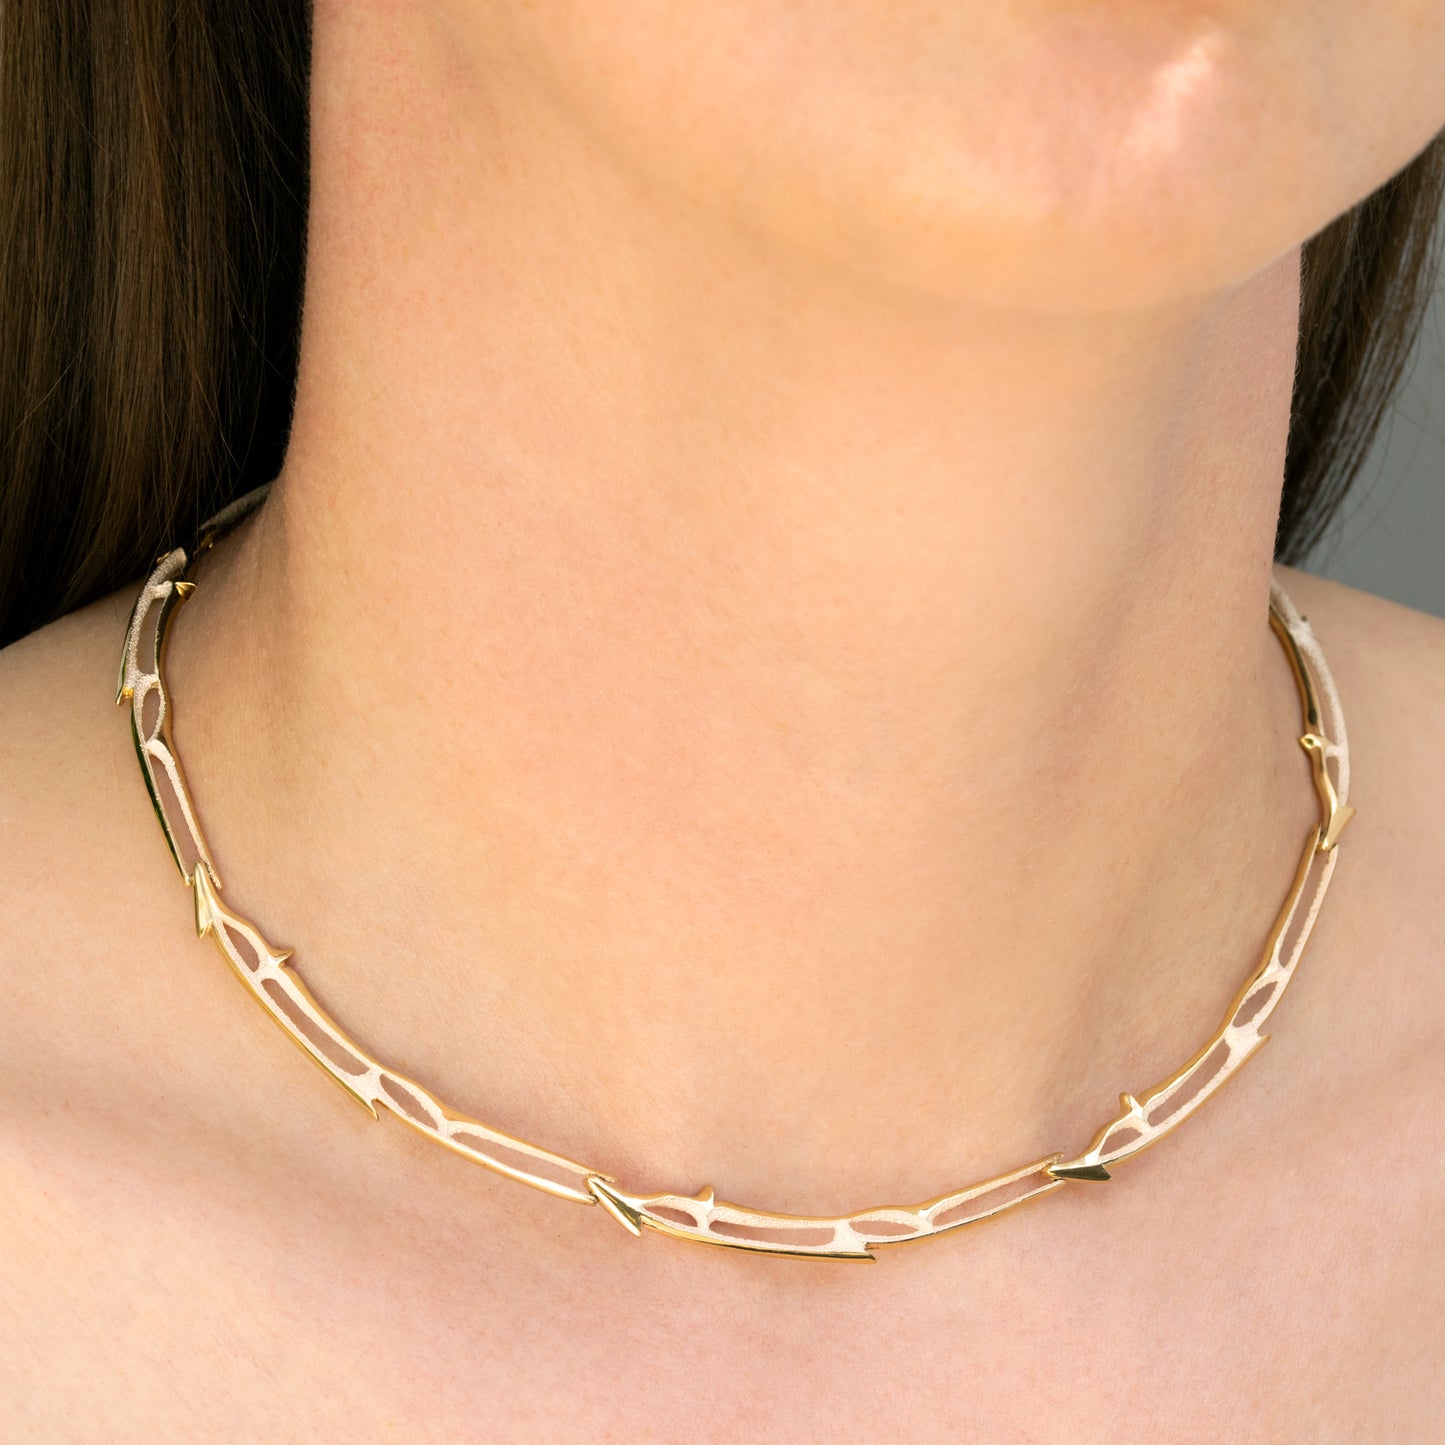 Orme-Brown Contemporary Fine Jewellery Ethical Luxury Arrow link necklace in sustainable recycled silver and gold